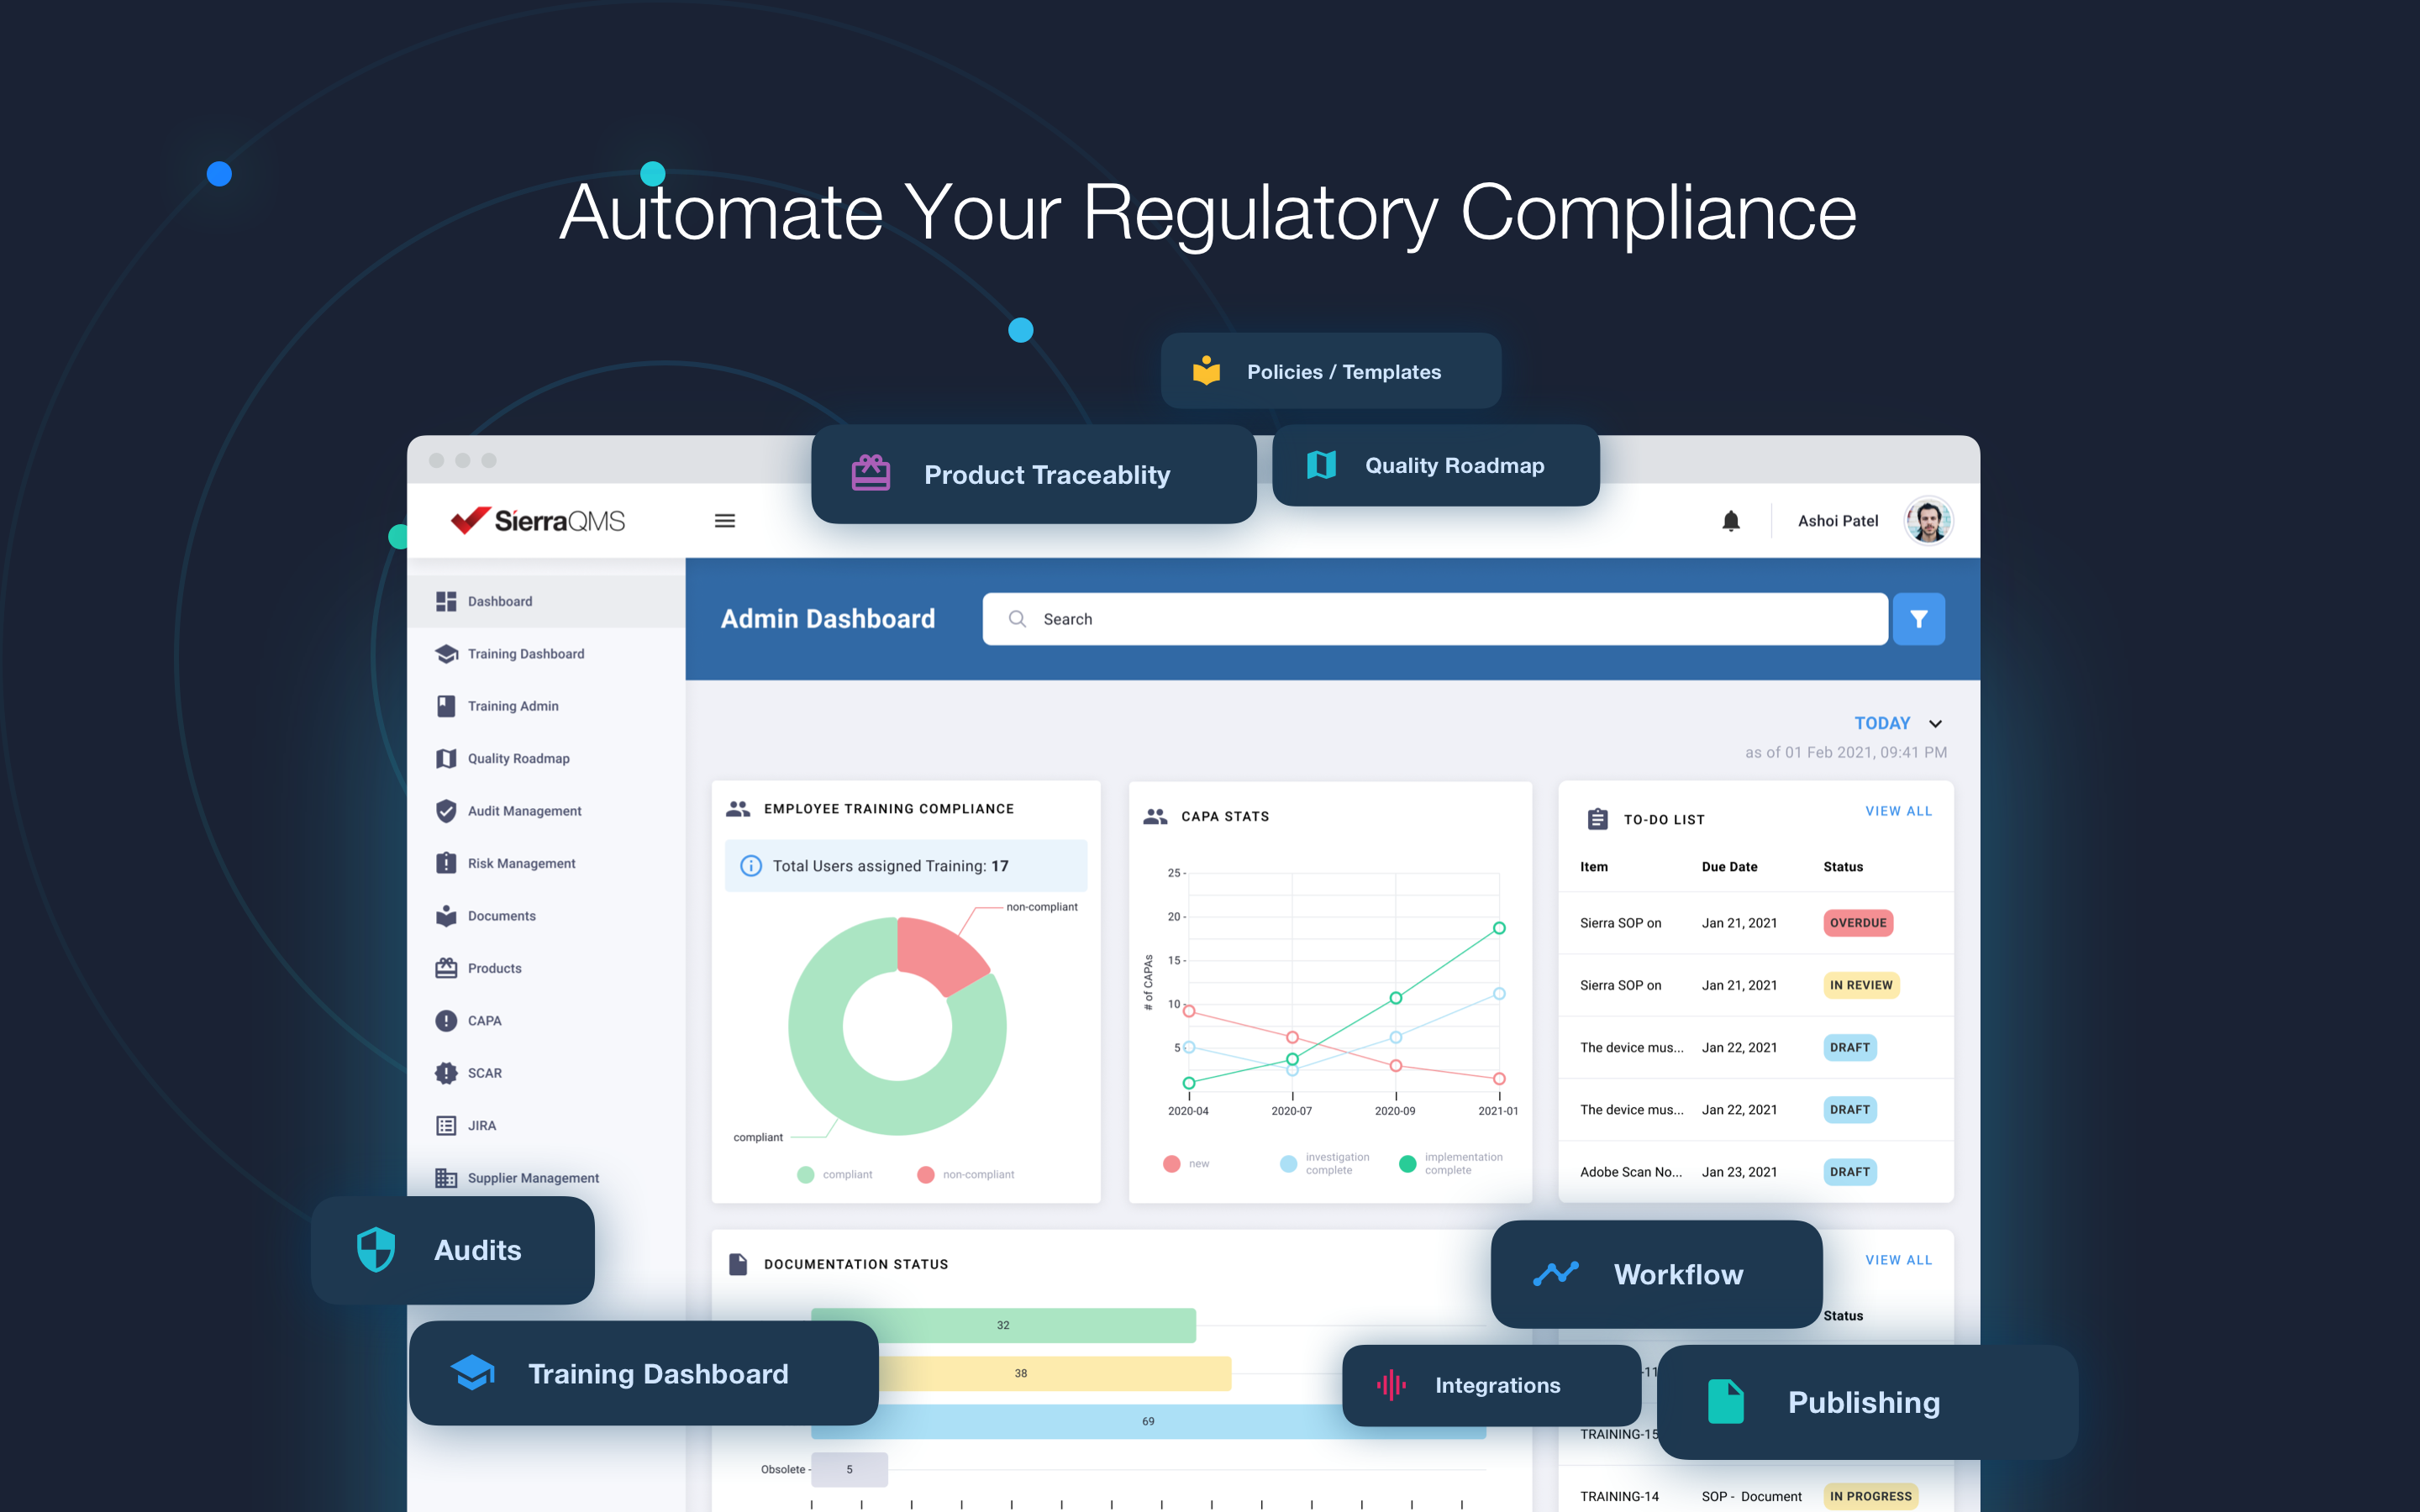 Sierra QMS Software - Sierra QMS is designed to support the management of documents, trainings, non-conformances, CAPAs, and audit events to show compliance with GxP validation and verification processes and 21 CFR Part 11 requirements. Simplify and automate your compliance!